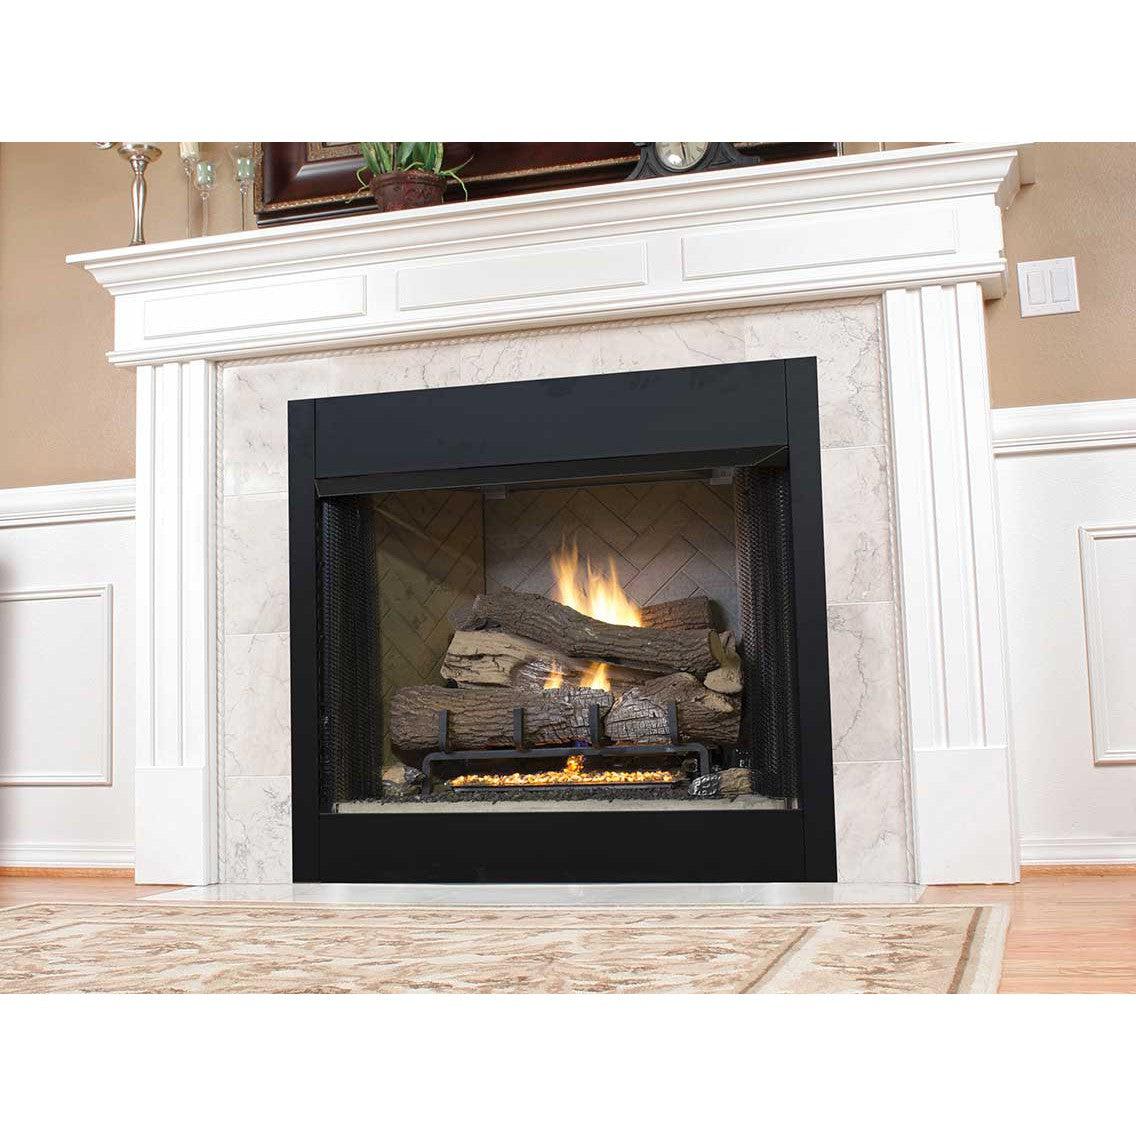 What Causes Issues To Replace Fireplace Refractory Panels?